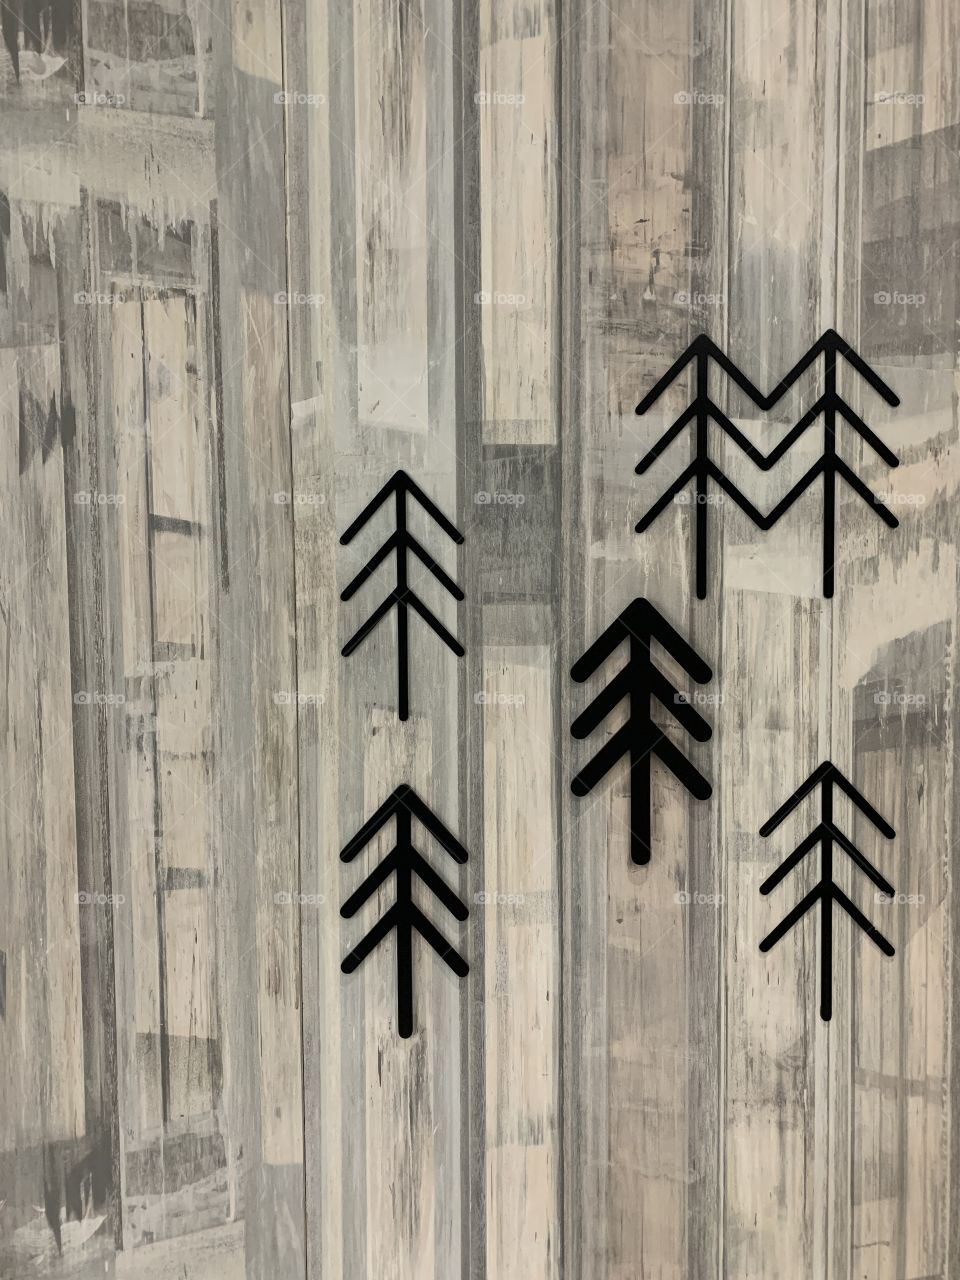 Black arrows and lines as a tree